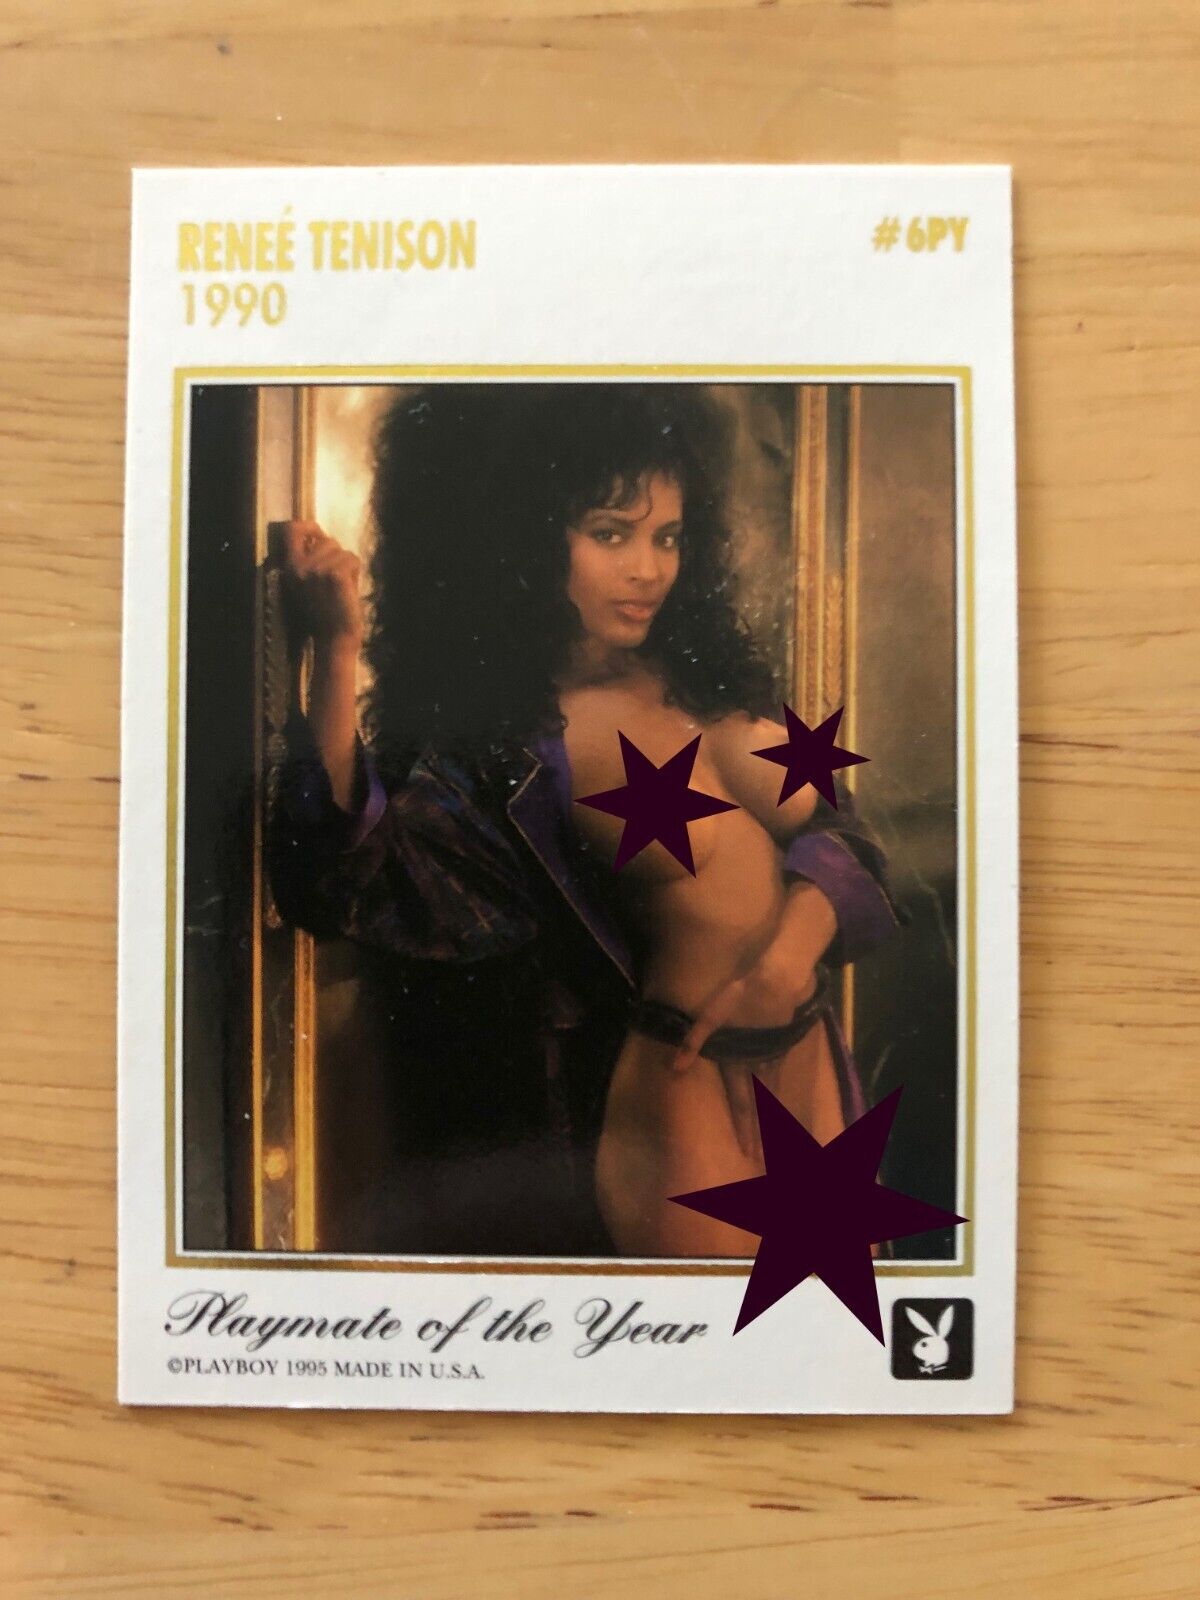 PLAYBOY 1990 Playmate of the Year GOLD FOIL Collector CARD RENEE\' TENISON #6PY